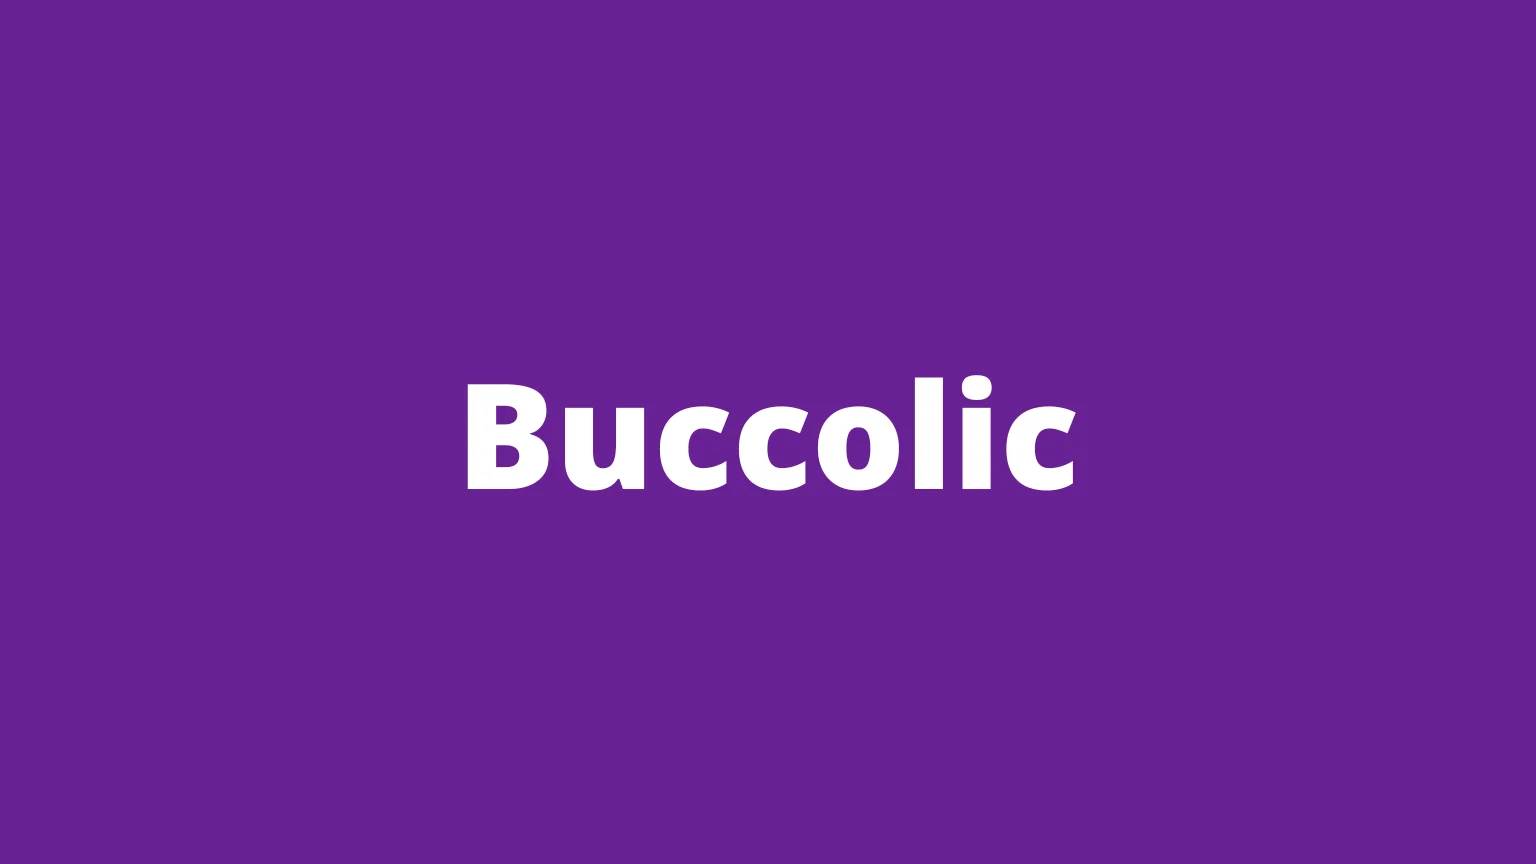 The word bucolic and its meaning